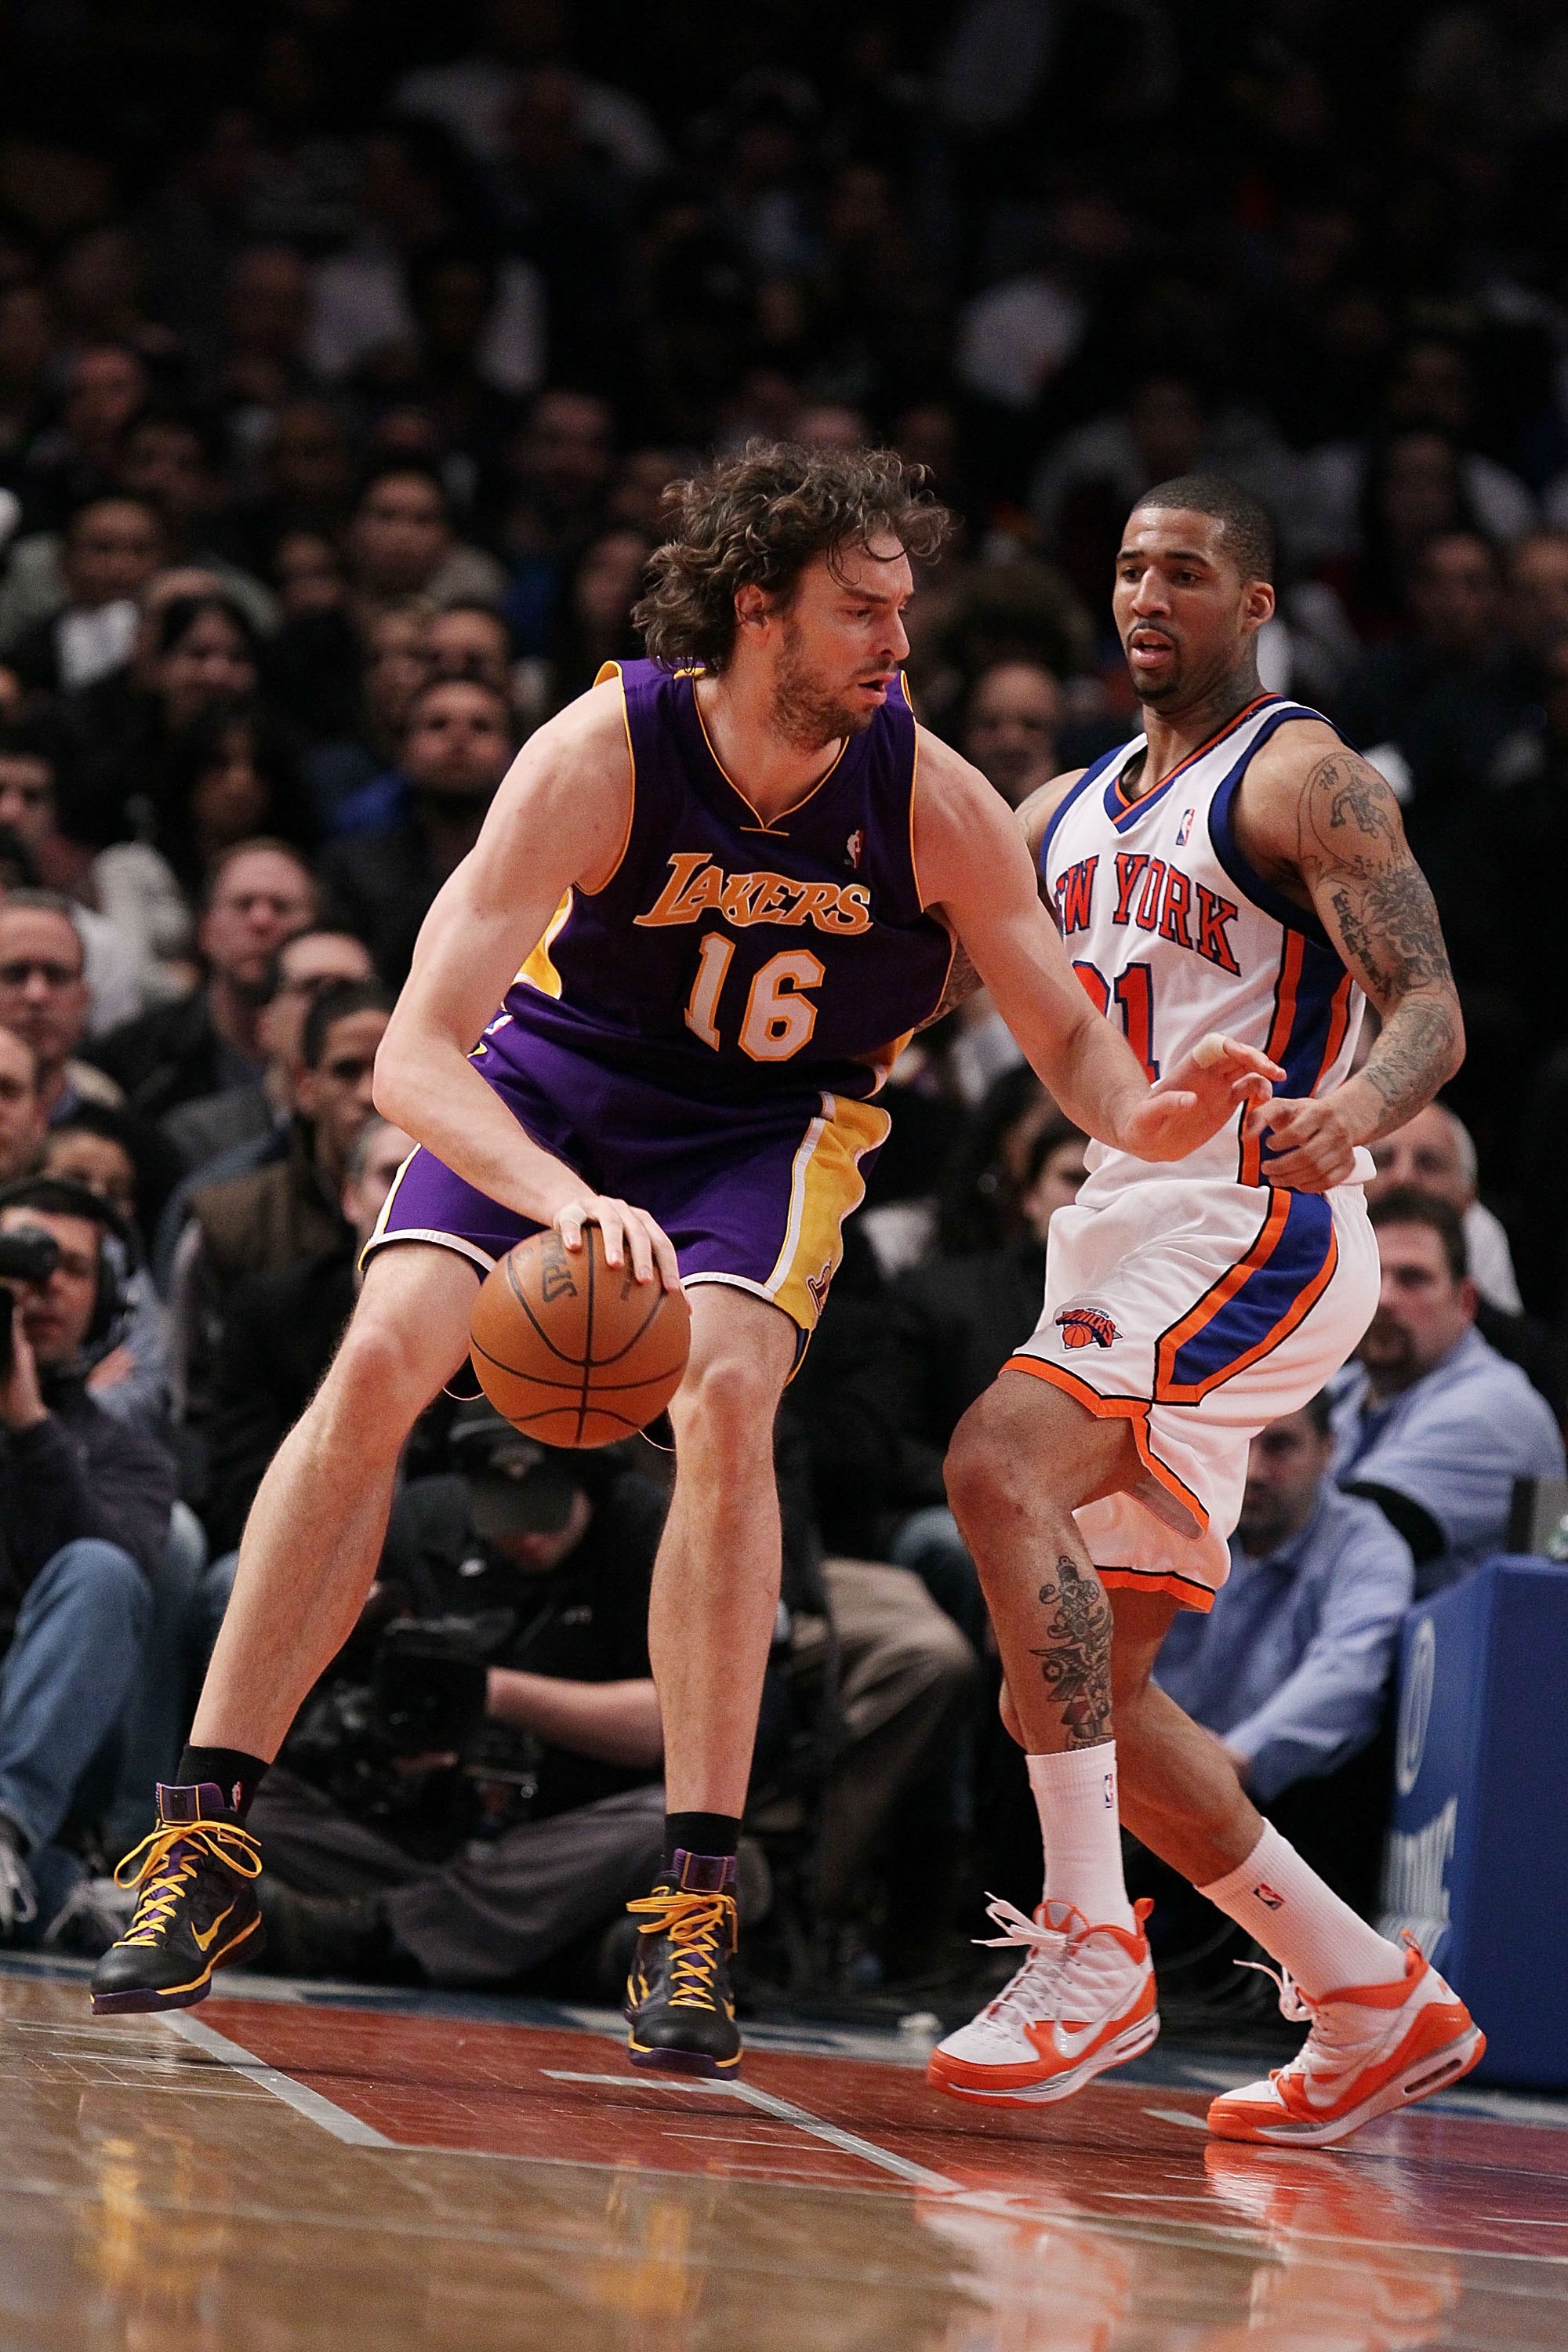 NEW YORK - JANUARY 22:  Pau Gasol #16 of the Los Angeles Lakers posts up against Wilson Chandler #21 of the New York Knicks during their game at Madison Square Garden on January 22, 2010 in New York, New York.  NOTE TO USER: User expressly acknowledges an